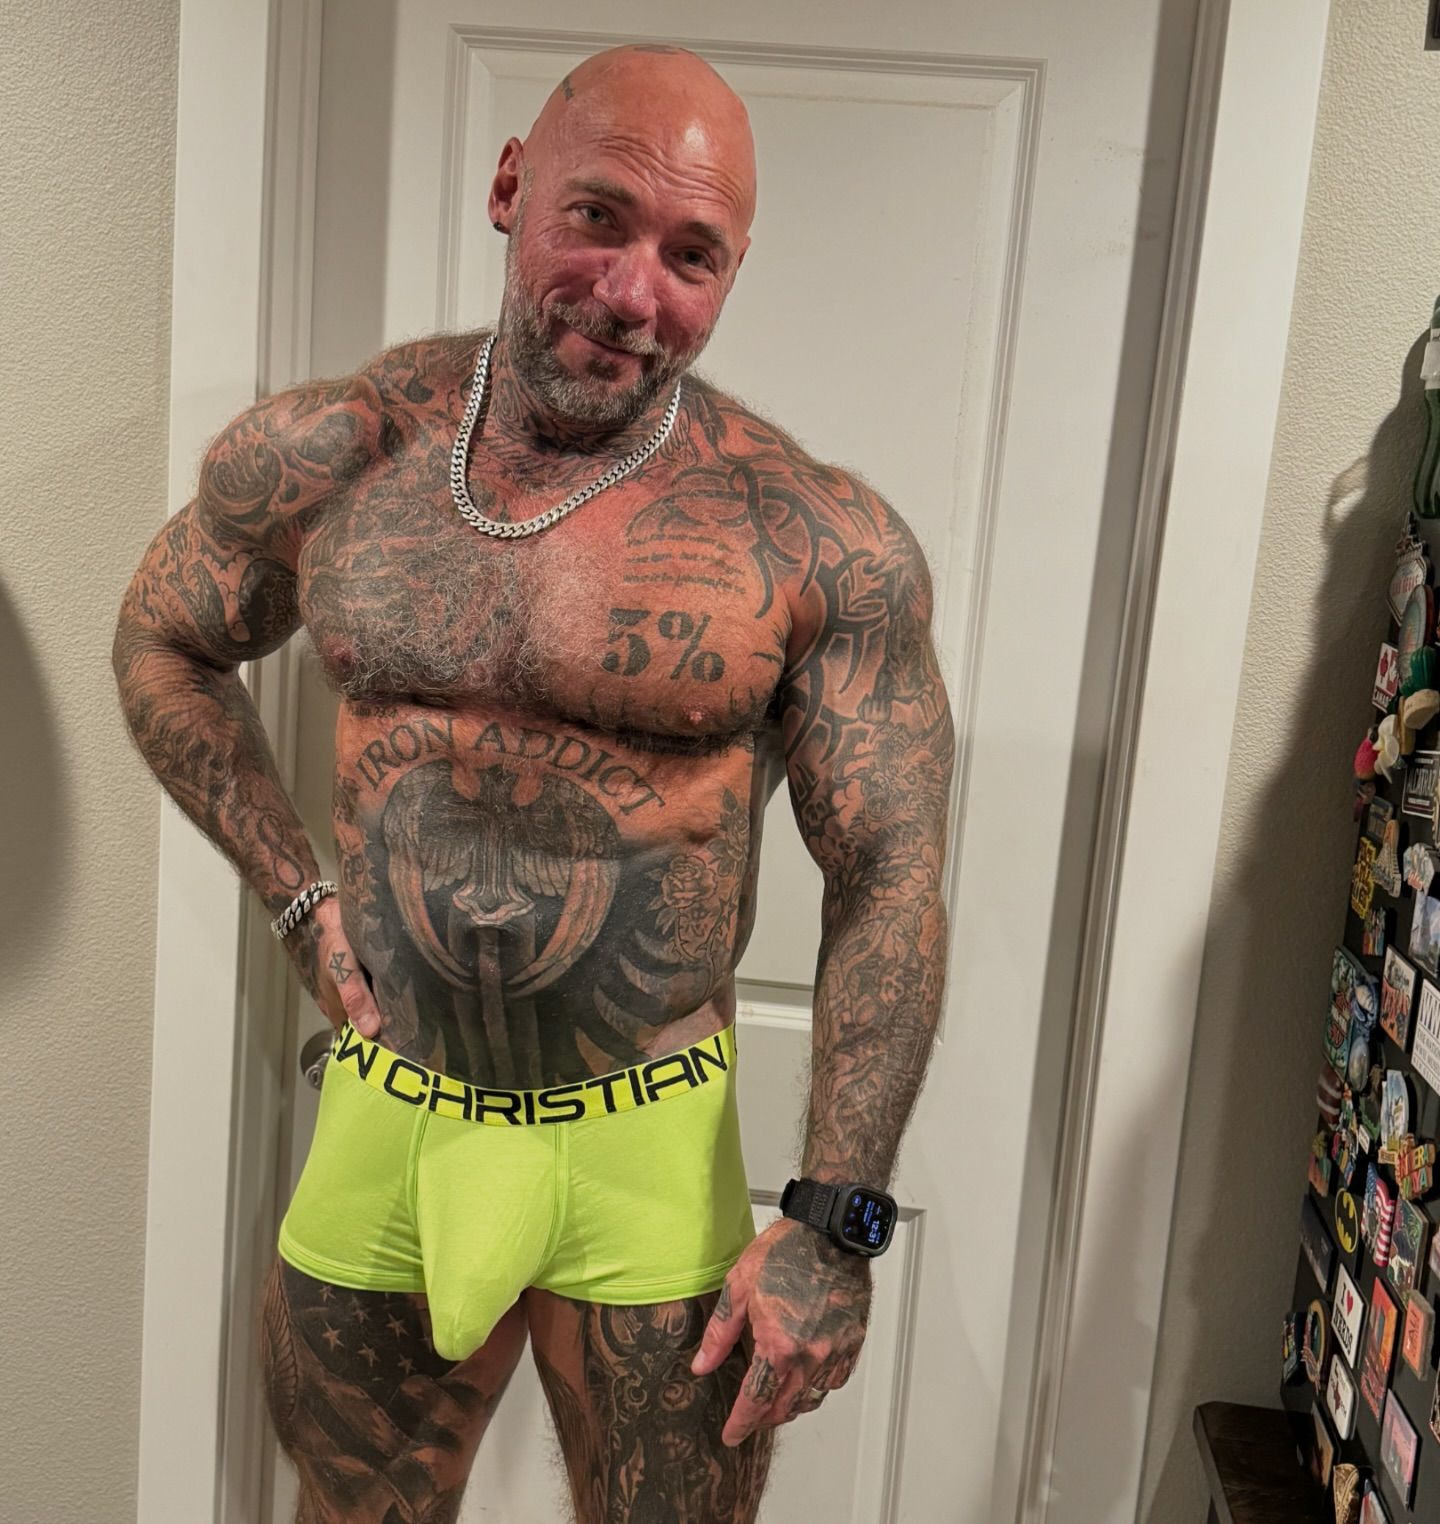 Unlike other people, I absolutely will not photoshop or edit my pics in any way! What you see is what you get 😉
.
.
.
.
.
.
#inkedmuscle #gaybear #muscle #inked #dadbod #denver #fitness #gaypride #tattoo #gaybodybuilder #beardedgay #musclesandtattoos #hairymuscle #gayworld #hotdaddies #gaymuscle  #gaymen #gaypride #gaypride #gay #lgbtq #musclebear #hairygay #gaylife #inkedmen #gayfit #masculine #beardedmen